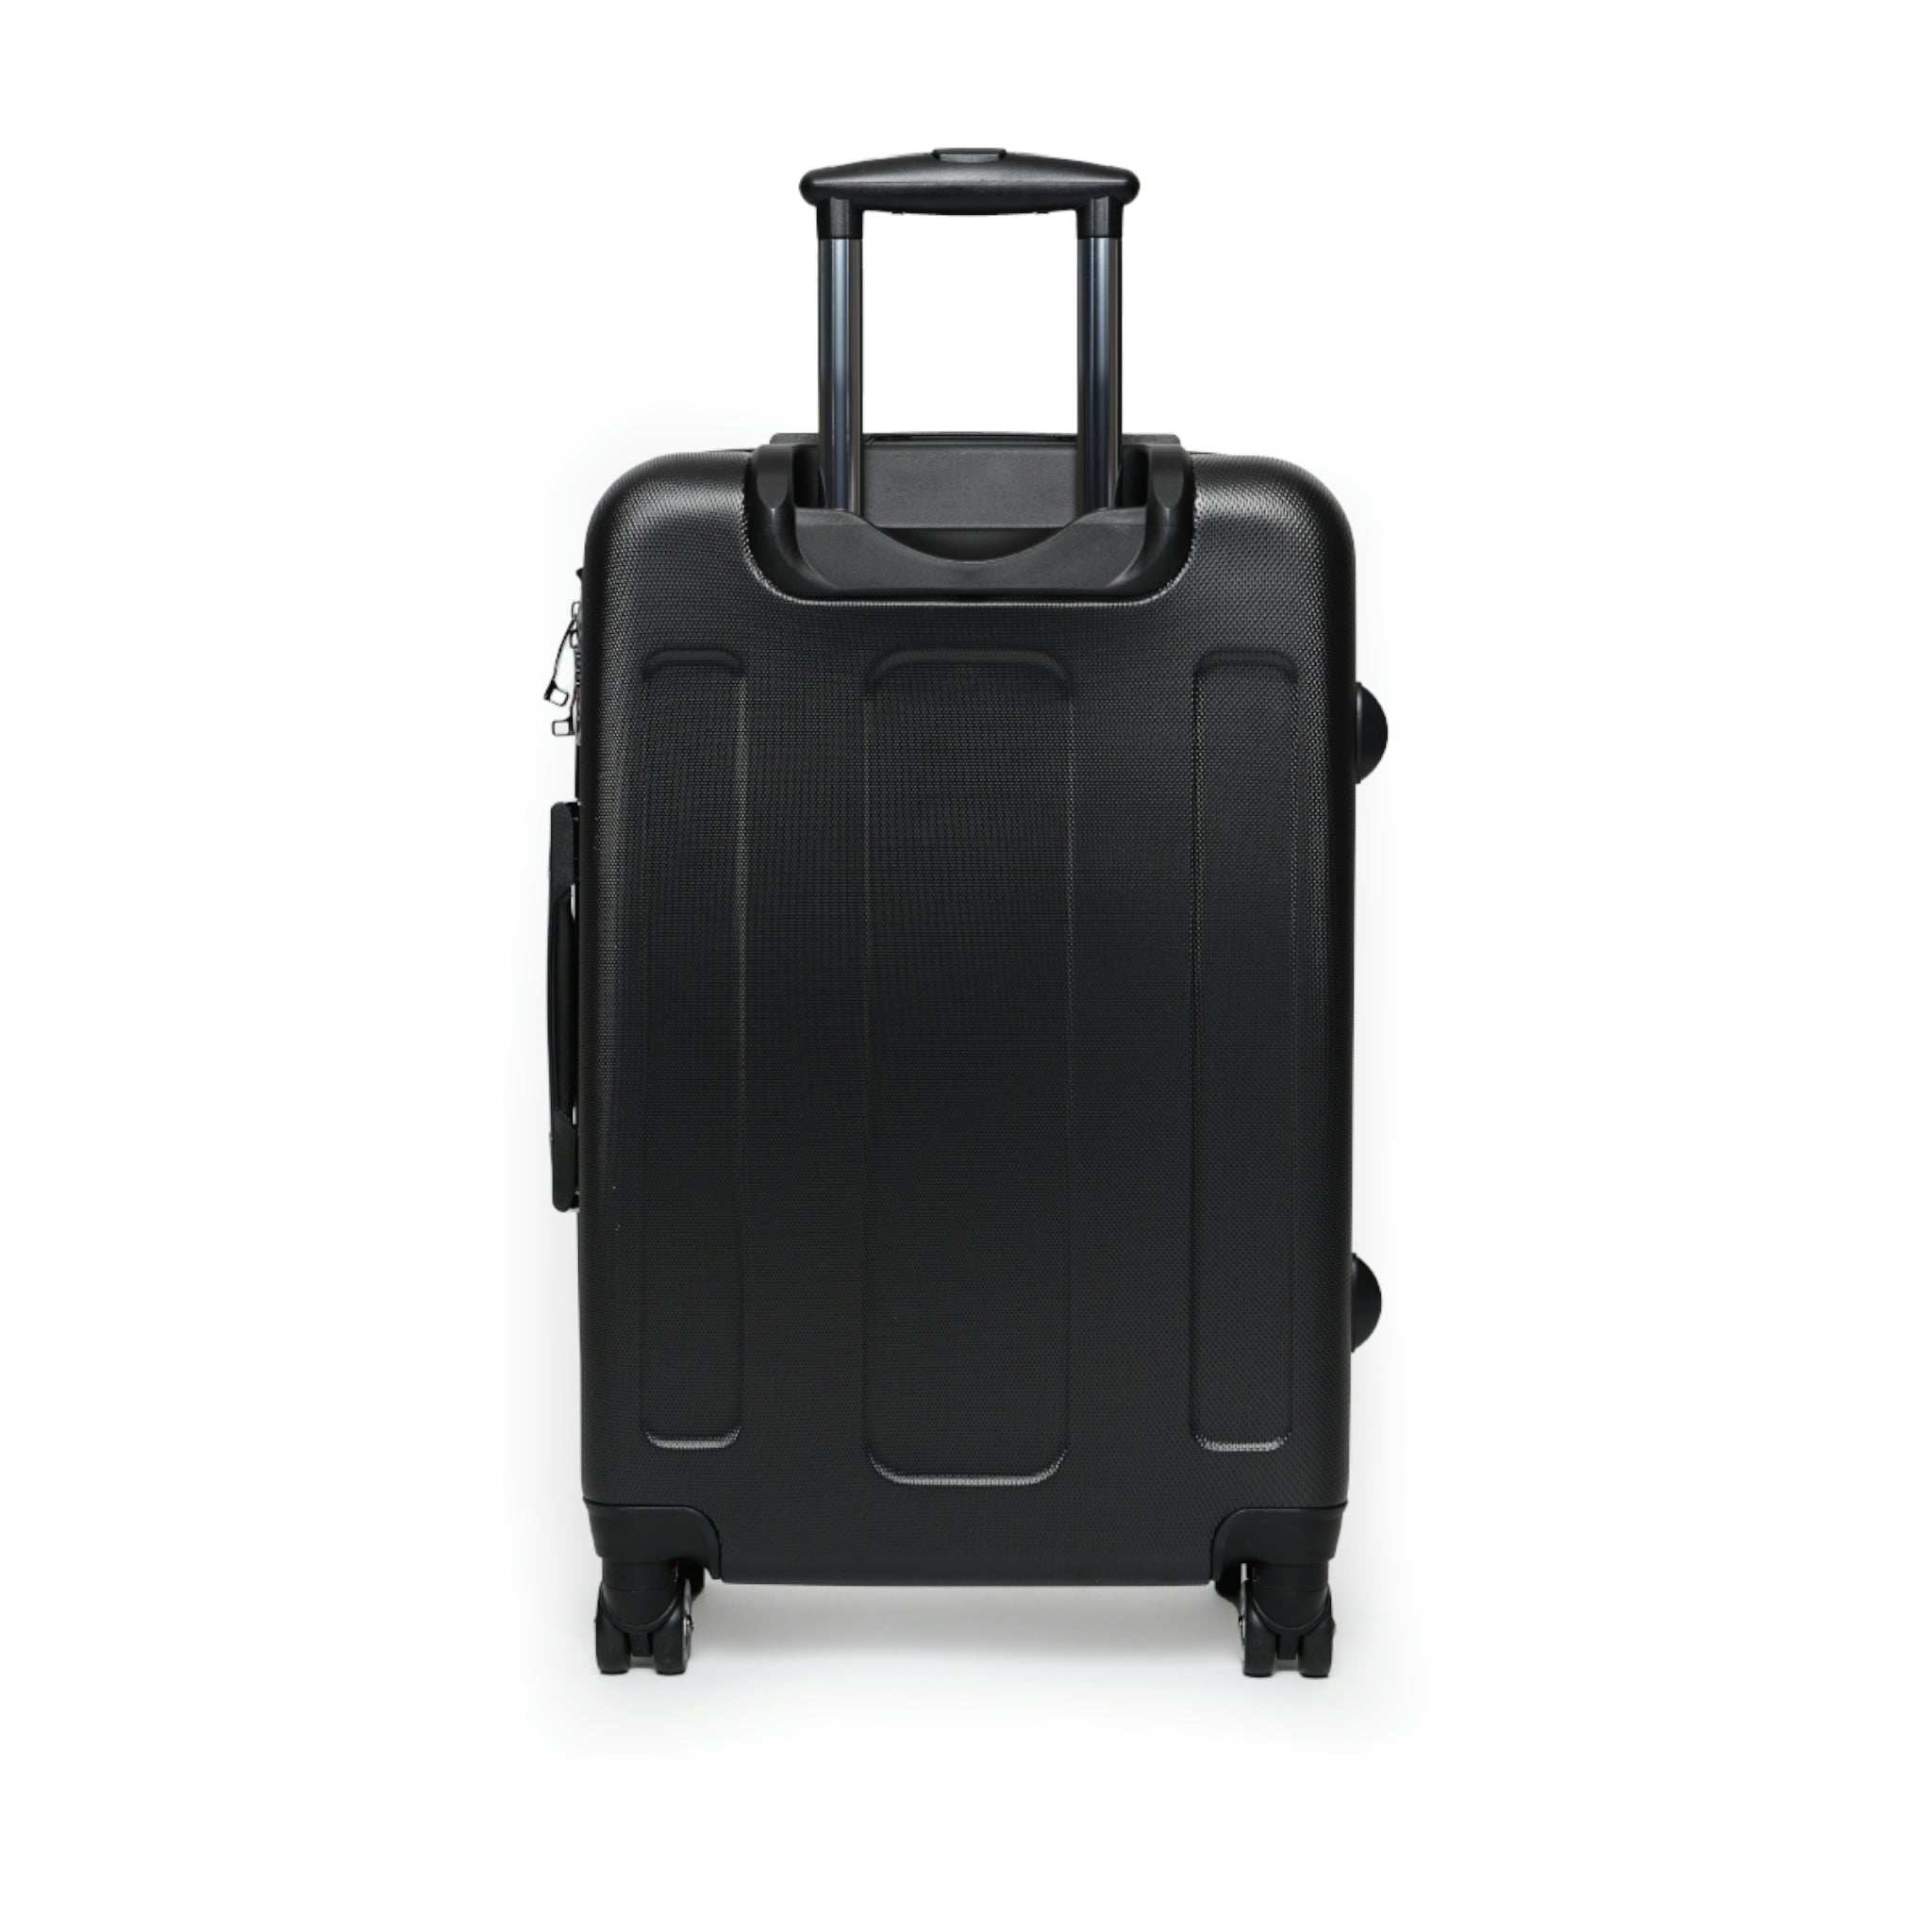 Sage Fire Bearpaw Suitcases